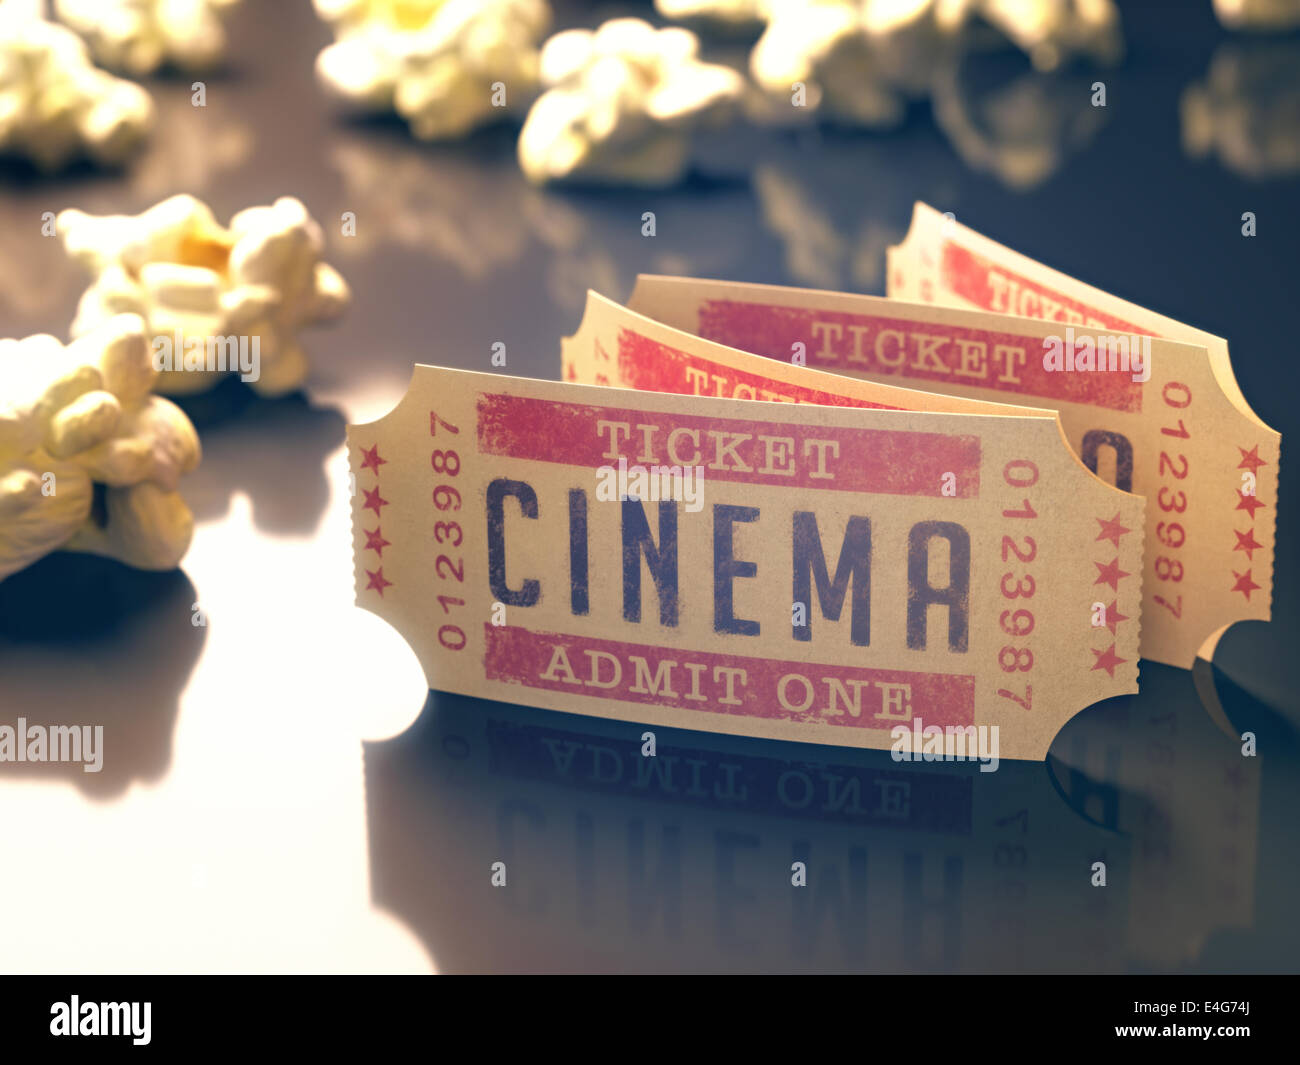 Entry ticket to the cinema with popcorn around. Clipping path included. Stock Photo